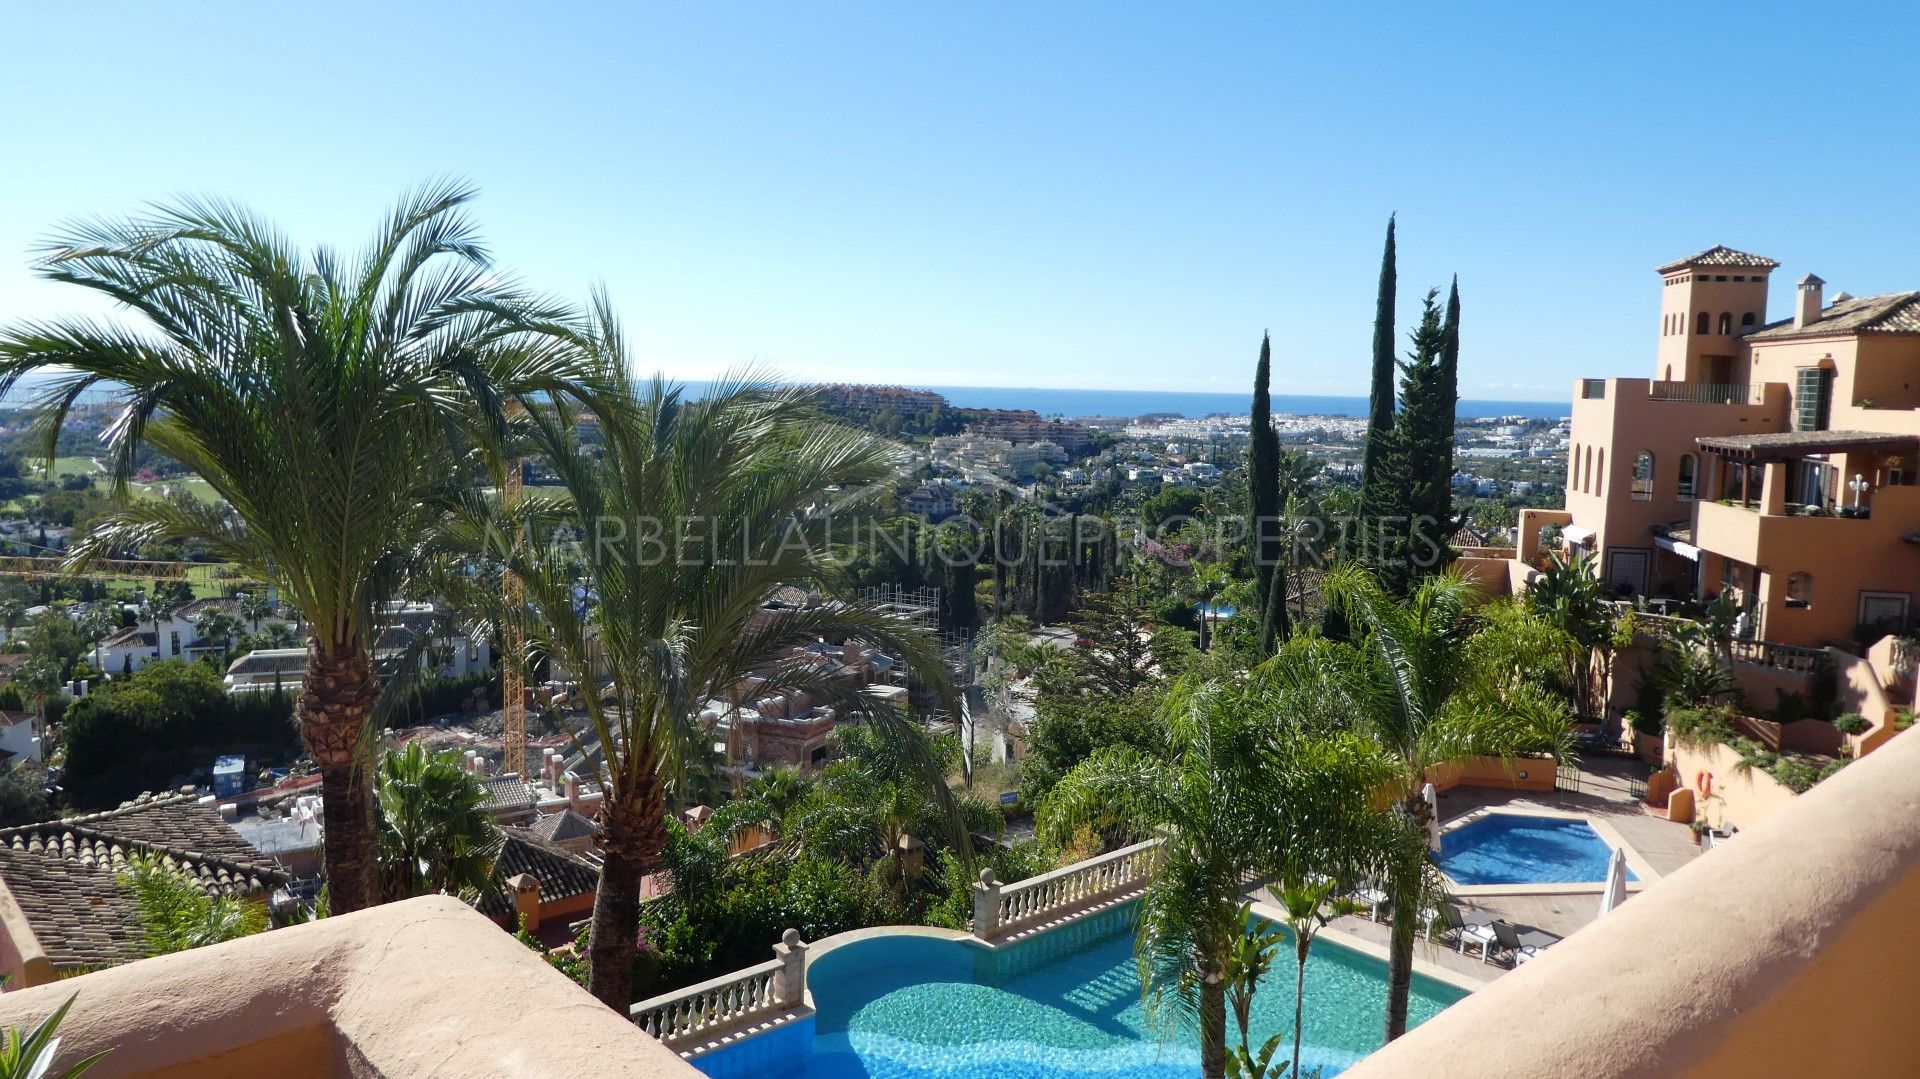 The best priced duplex penthouse in Los Belvederes – Price reduced to 620.000€!